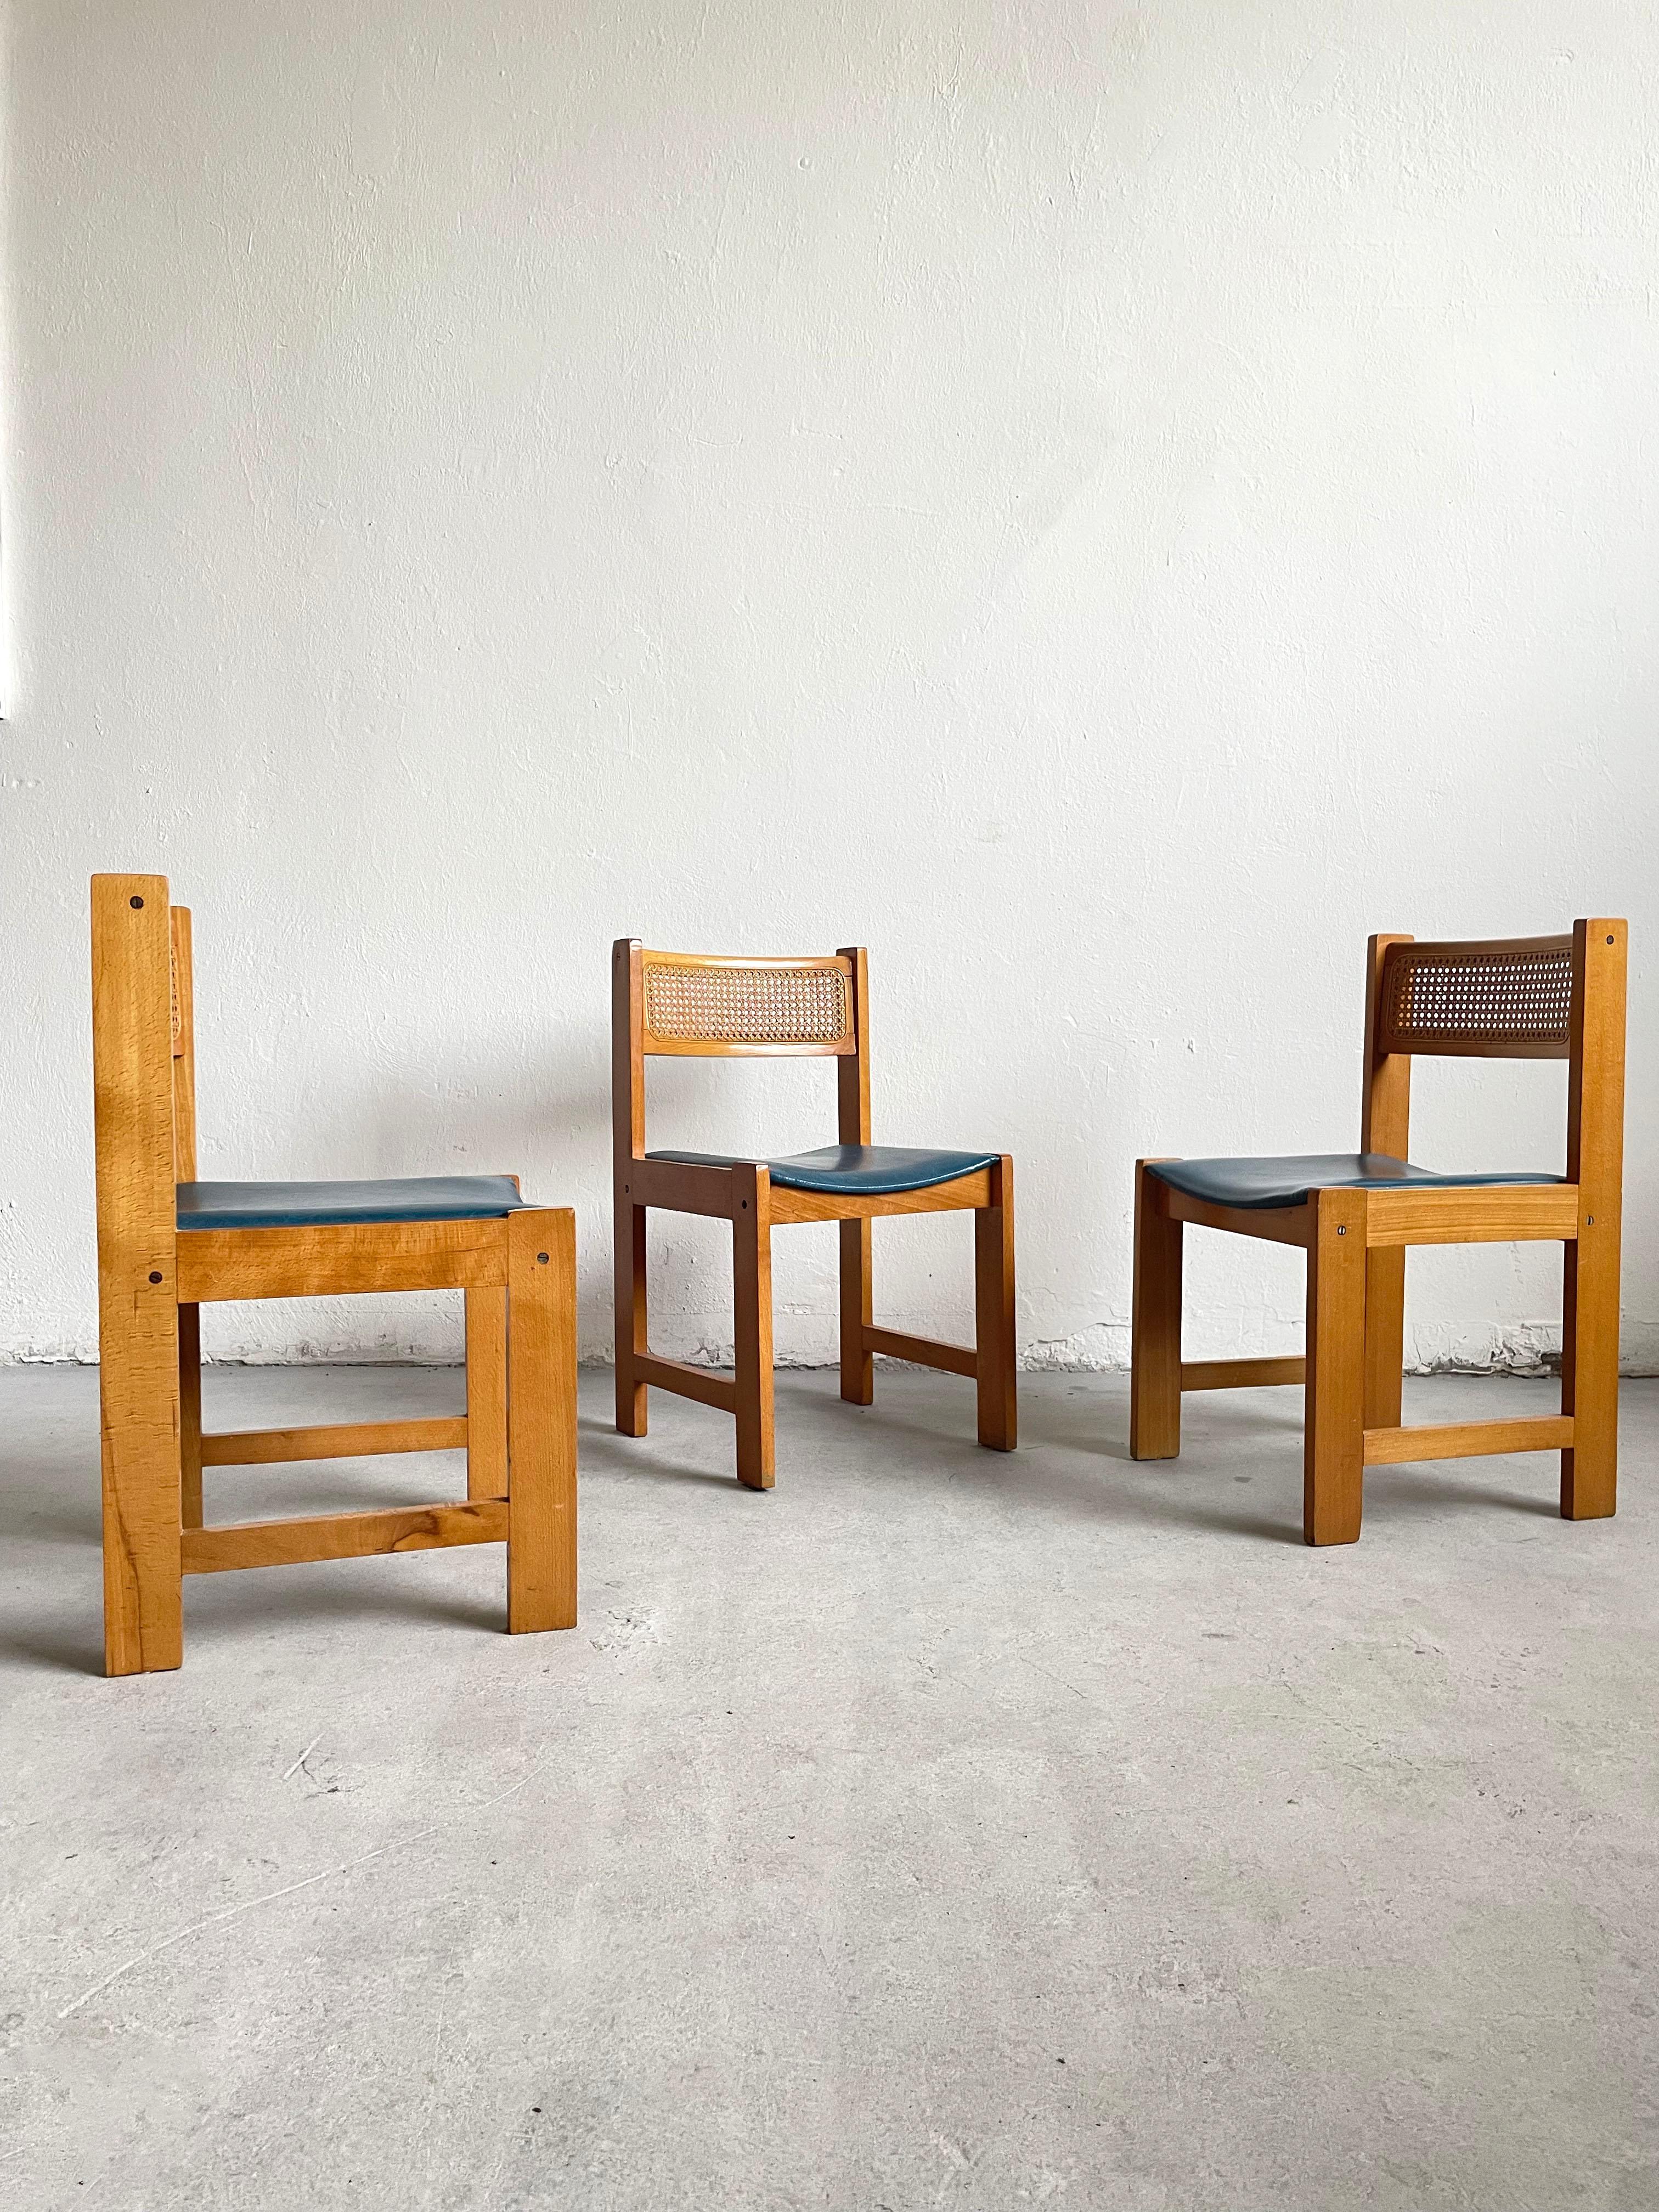 Hand-Crafted Set of 4 Mid-Century Cane Rattan and Vinyl Wooden Dining Chairs, 1960s 1970s For Sale